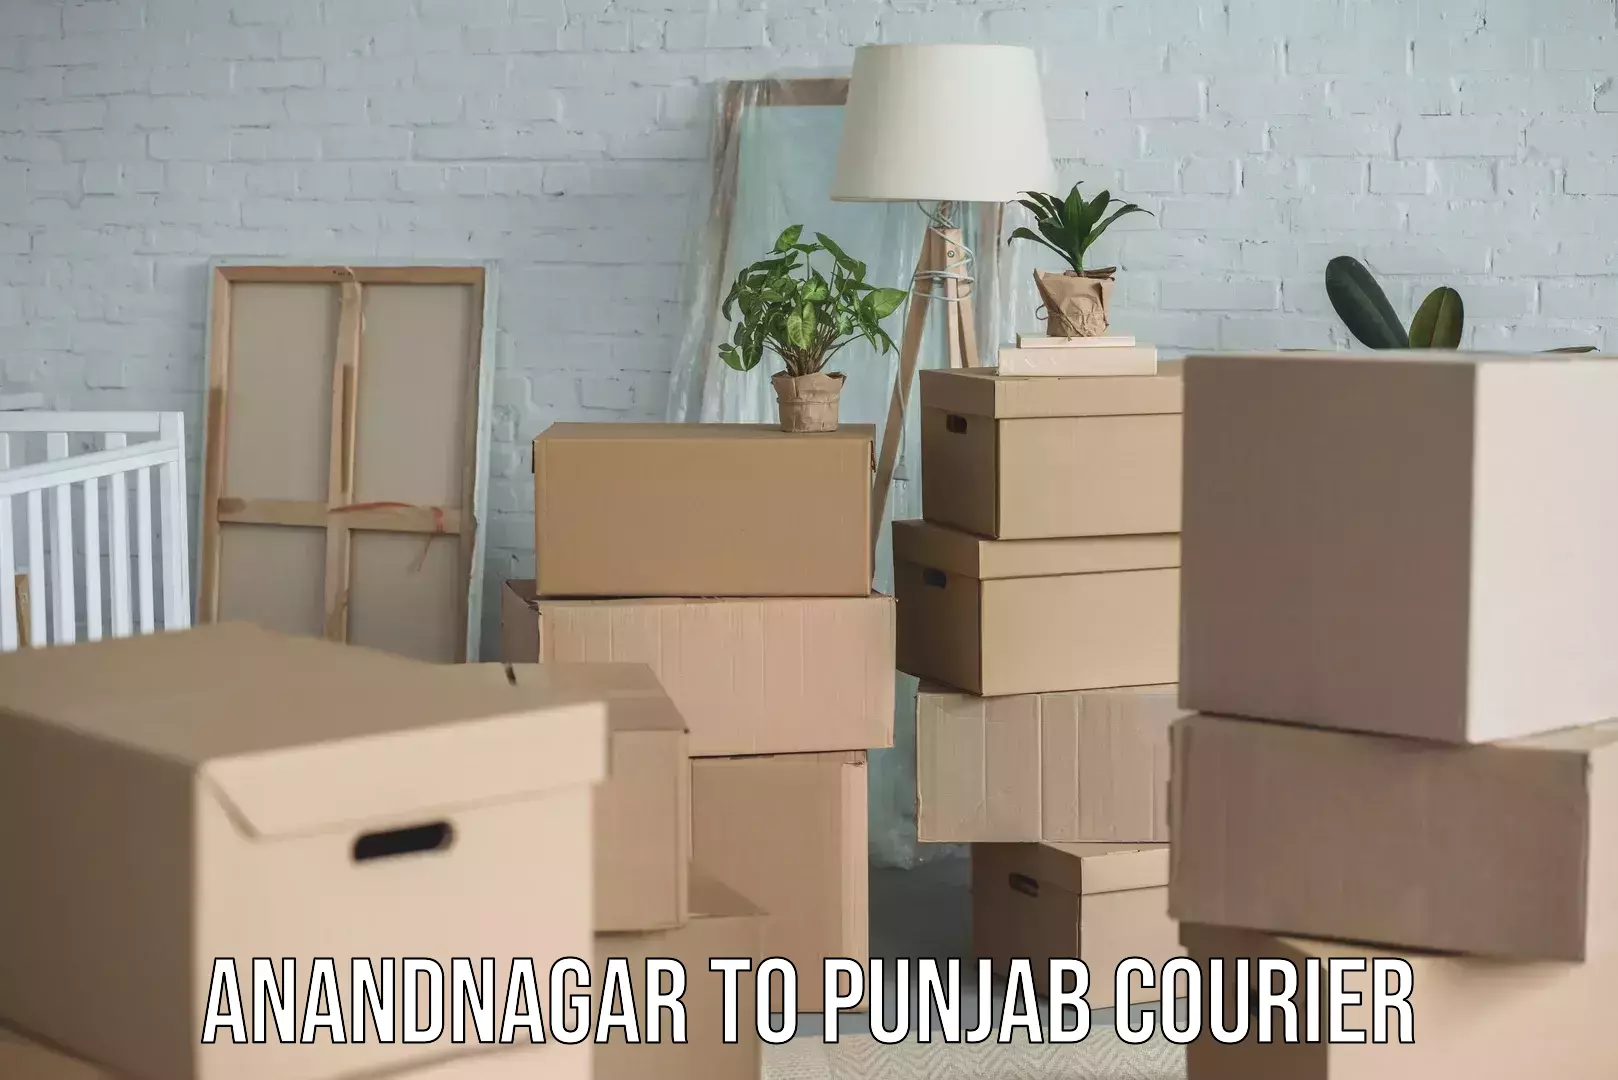 Fast-track shipping solutions Anandnagar to Punjab